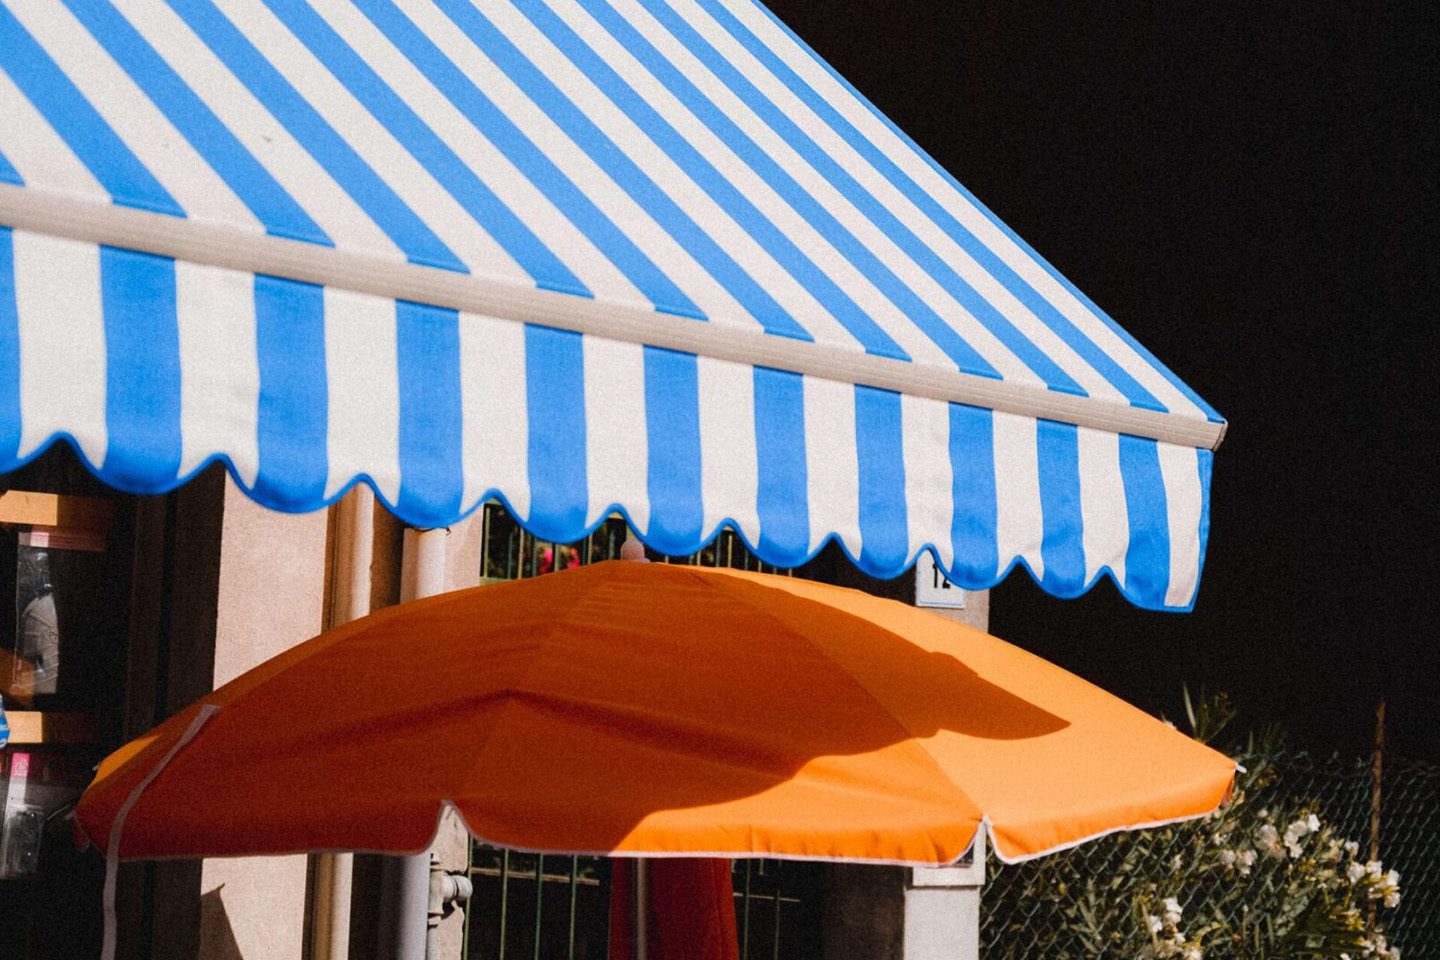 A blue and white awning with an orange umbrella.